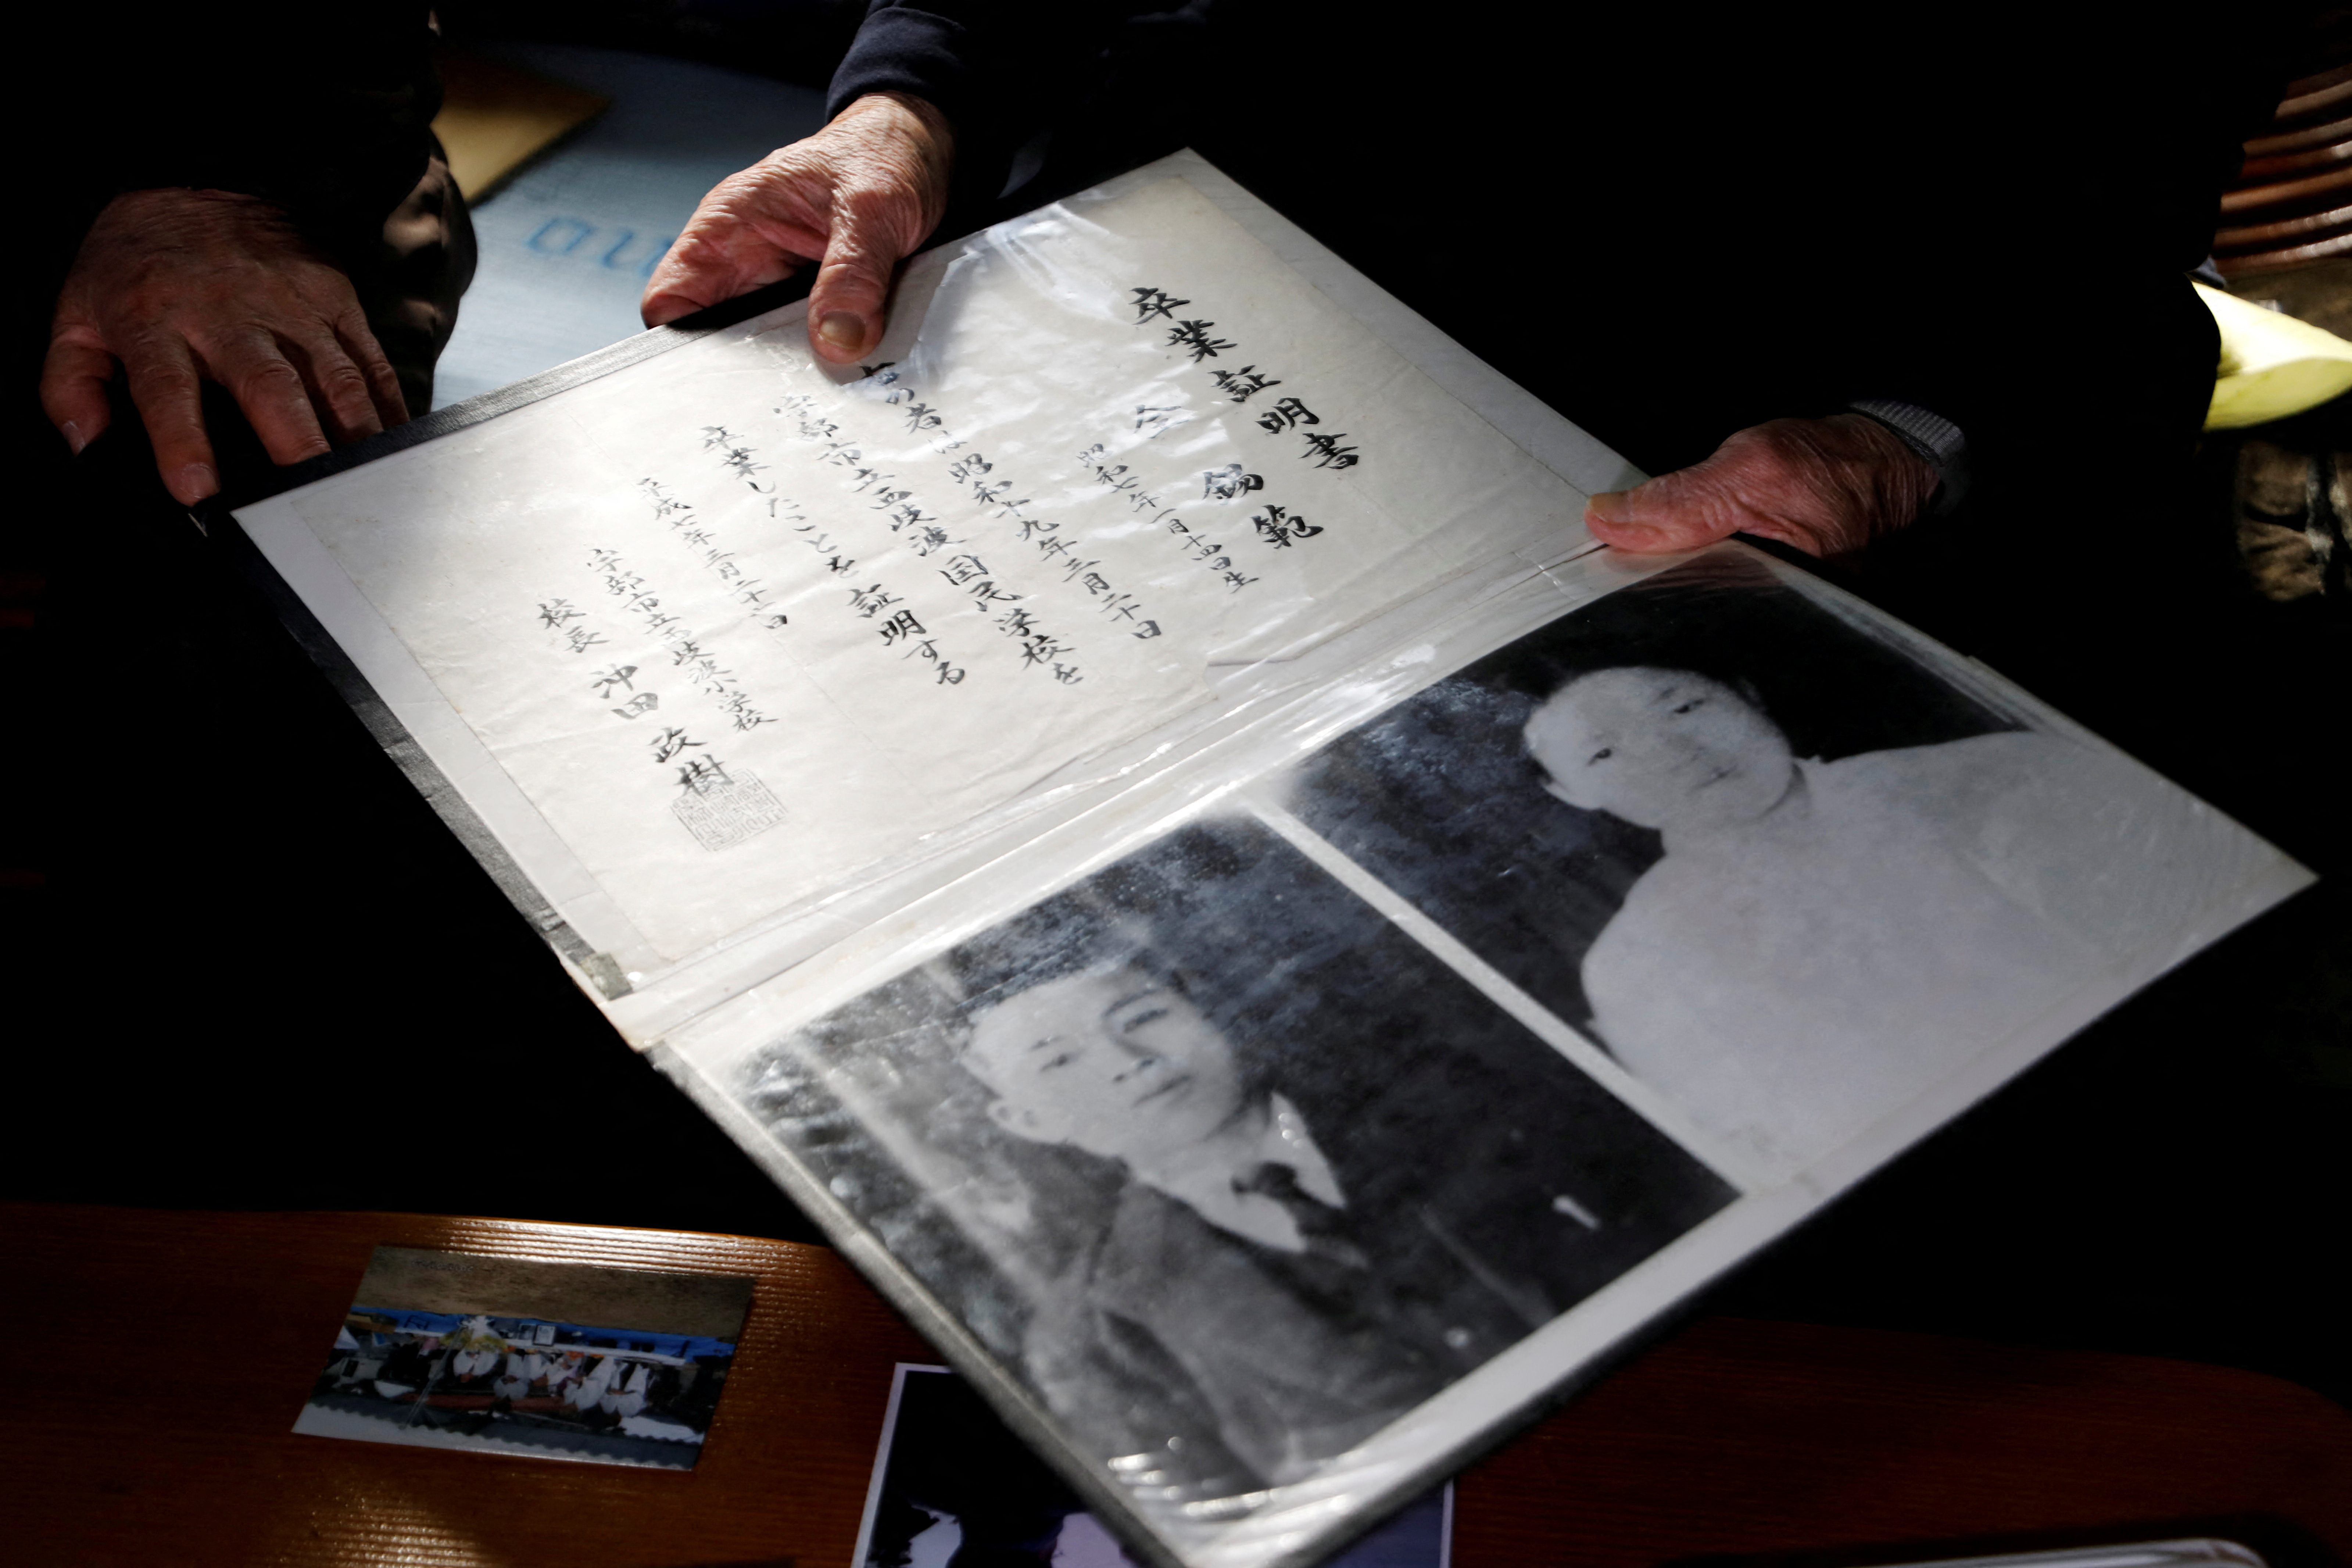 As Seoul and Tokyo improve ties, families of mine disaster victims see last chance for closure